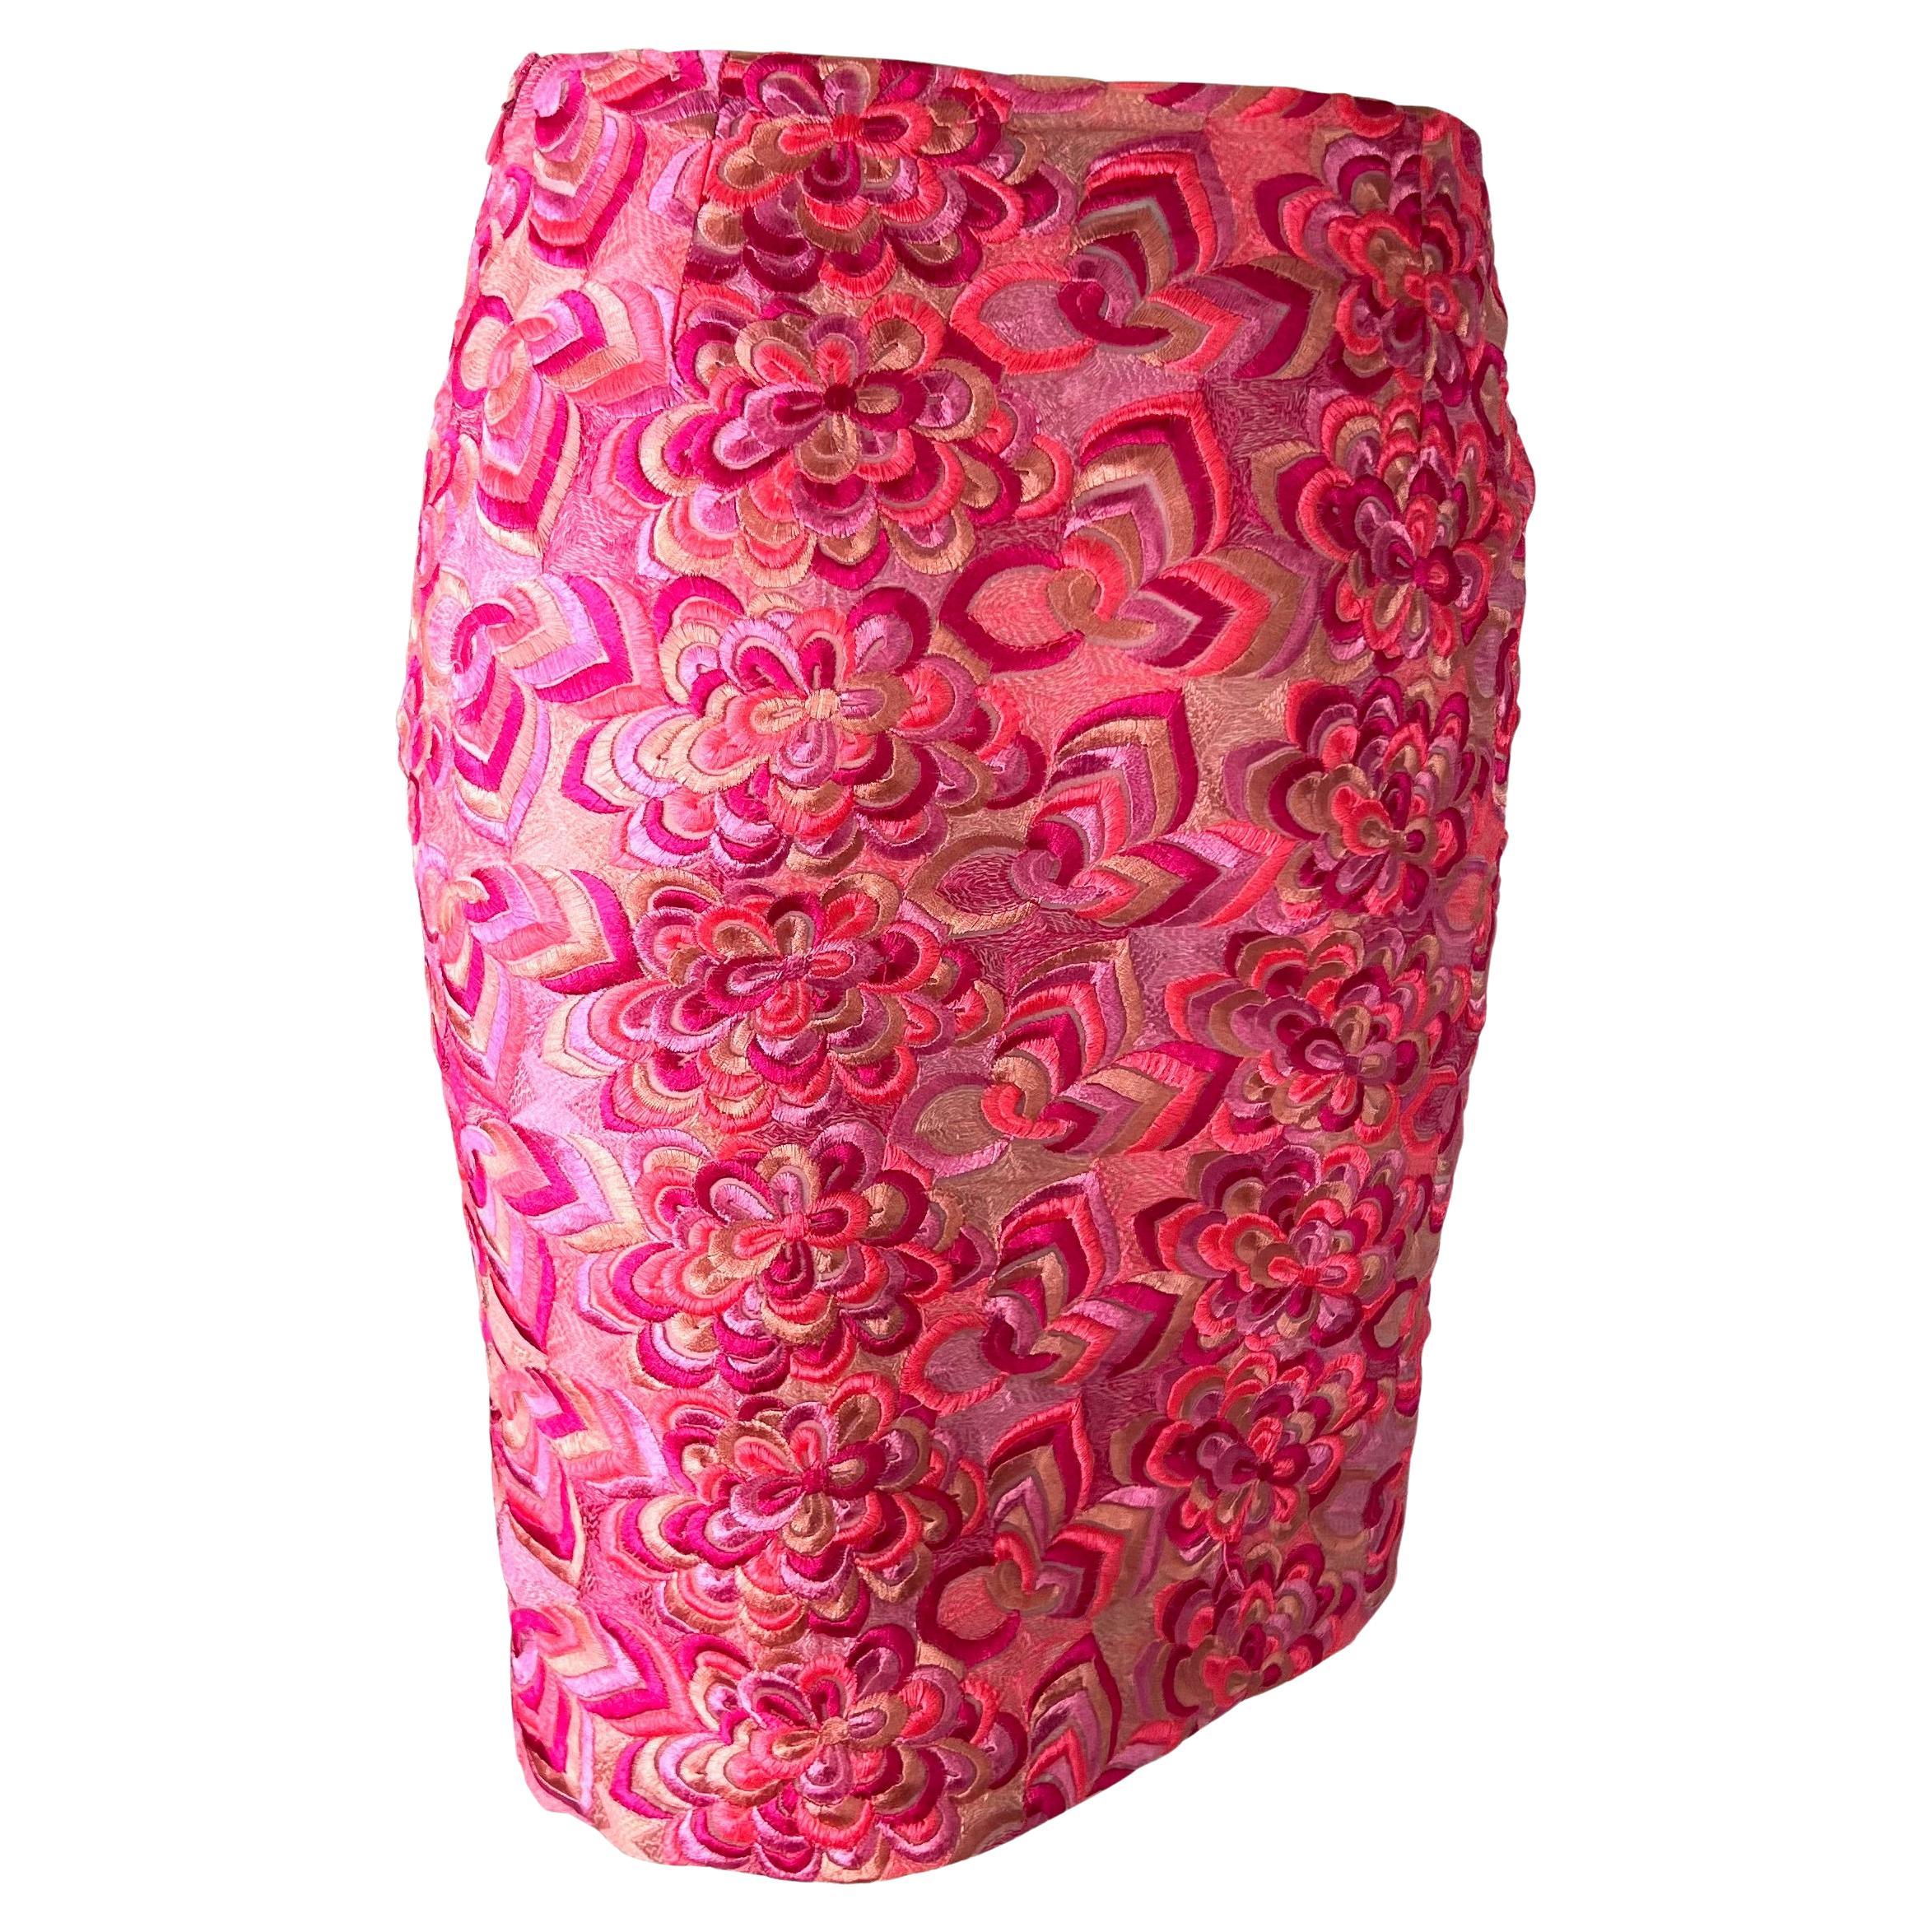 S/S 2000 Gianni Versace by Donatella Versace for Gianni Versace for Gianni Versace for Gianni Versace for Gianni Versace by Donatella Neon Pink Floral Embroidered Skirt Bon état - En vente à West Hollywood, CA